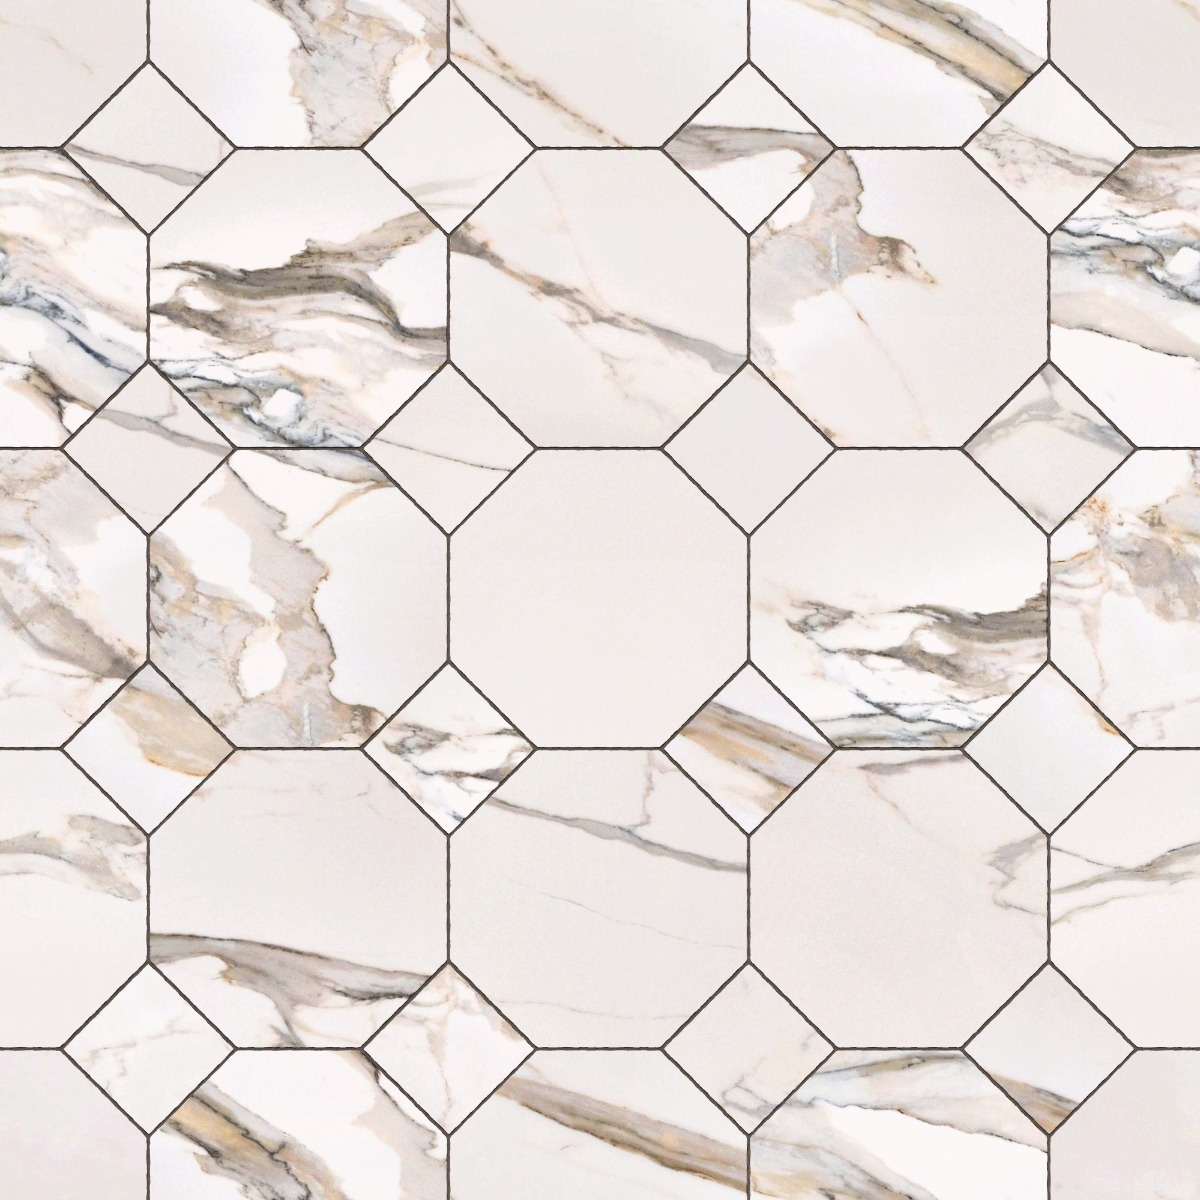 A seamless stone texture with calacatta gold blocks arranged in a Octagon Square pattern